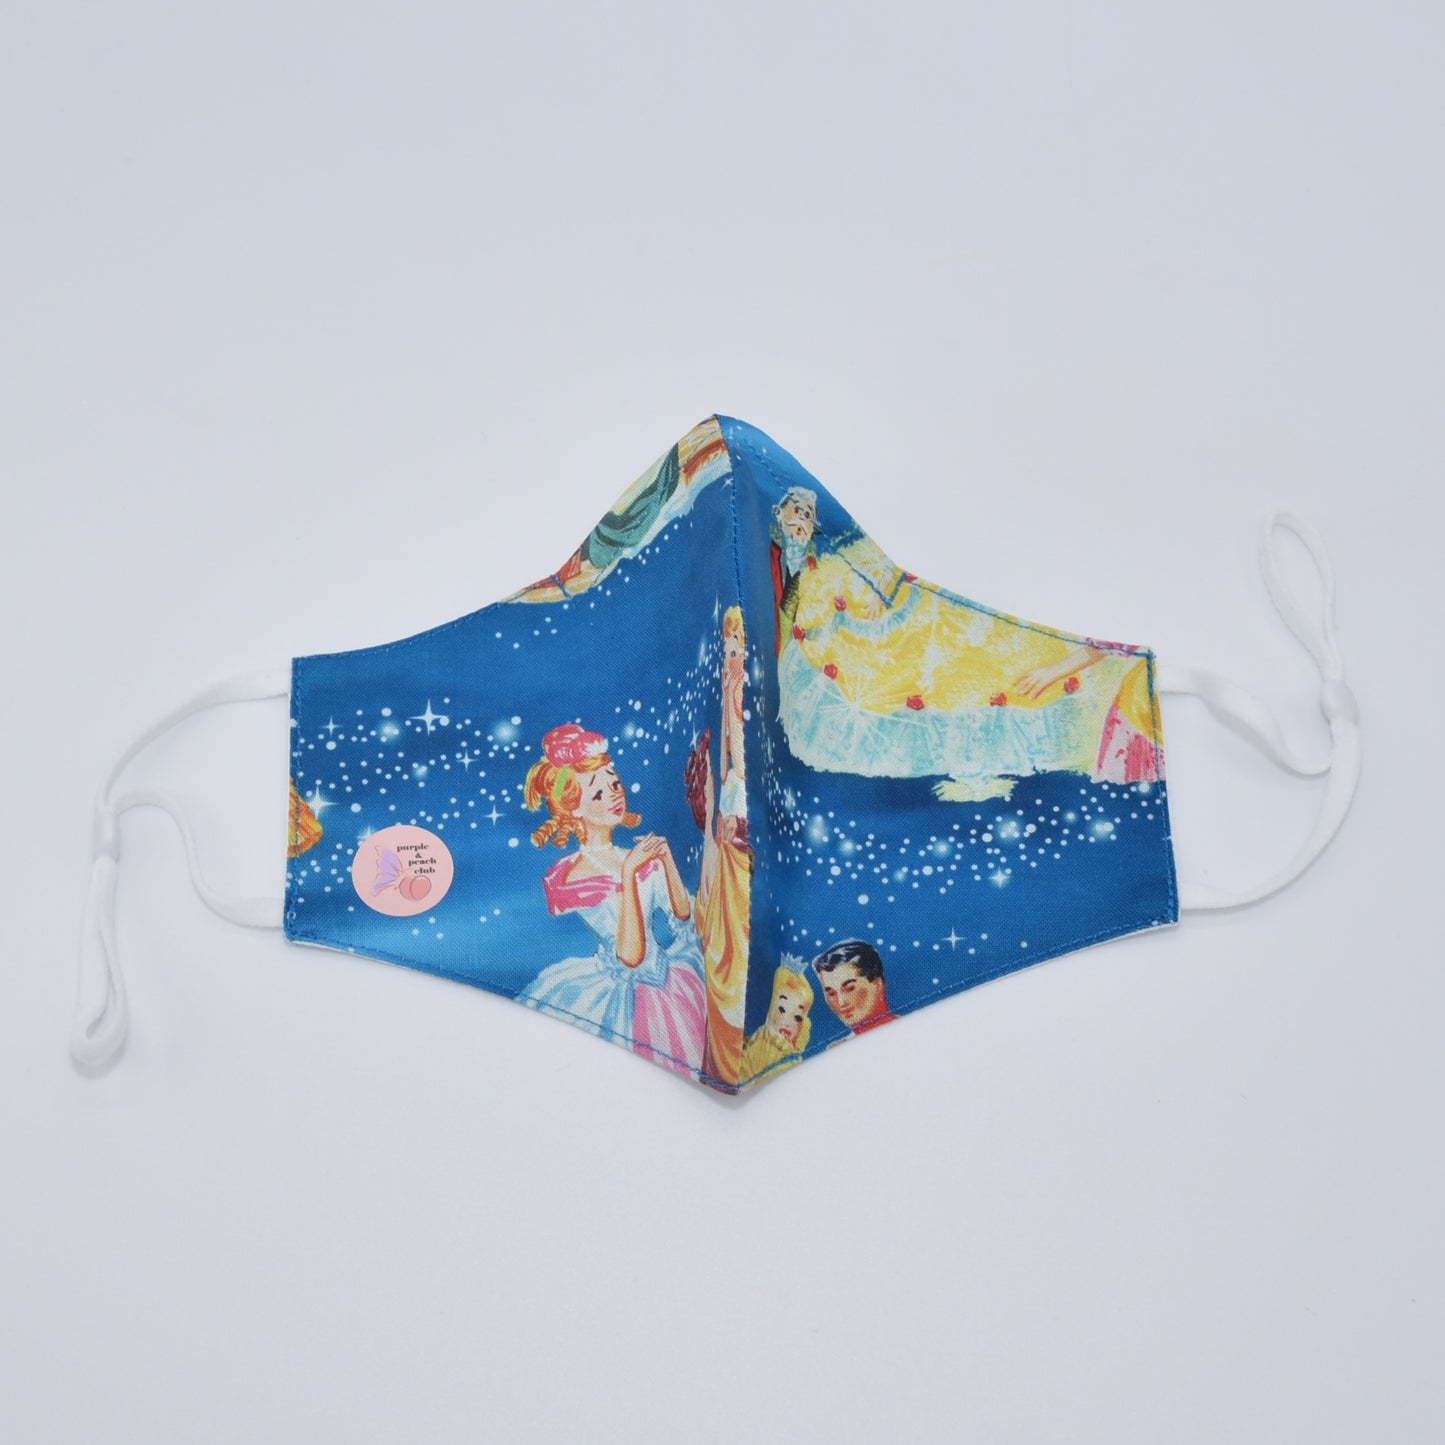 This cinderella print cotton face mask is reversible and double-layered, built for comfort with an adjustable nose bridge and adjustable ear straps. 